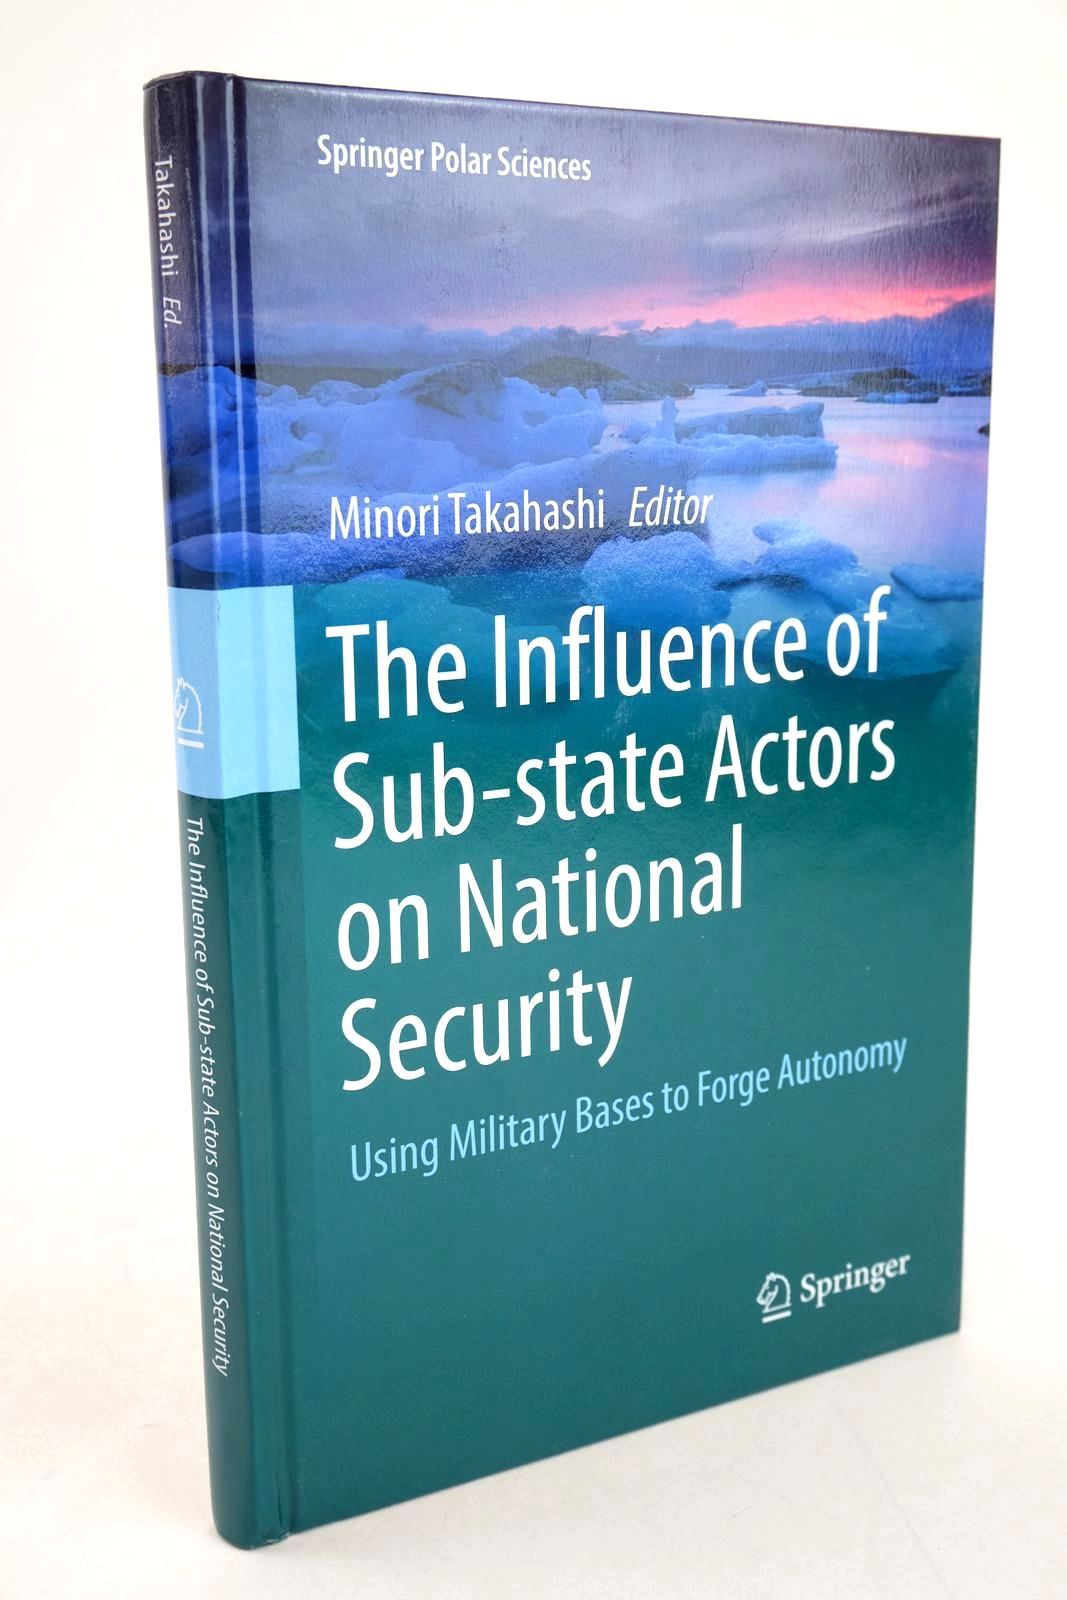 Photo of THE INFLUENCE OF SUB-STATE ACTORS ON NATIONAL SECURITY: USING MILITARY BASES TO FORGE AUTONOMY written by Takahashi, Minori published by Springer (STOCK CODE: 1327671)  for sale by Stella & Rose's Books